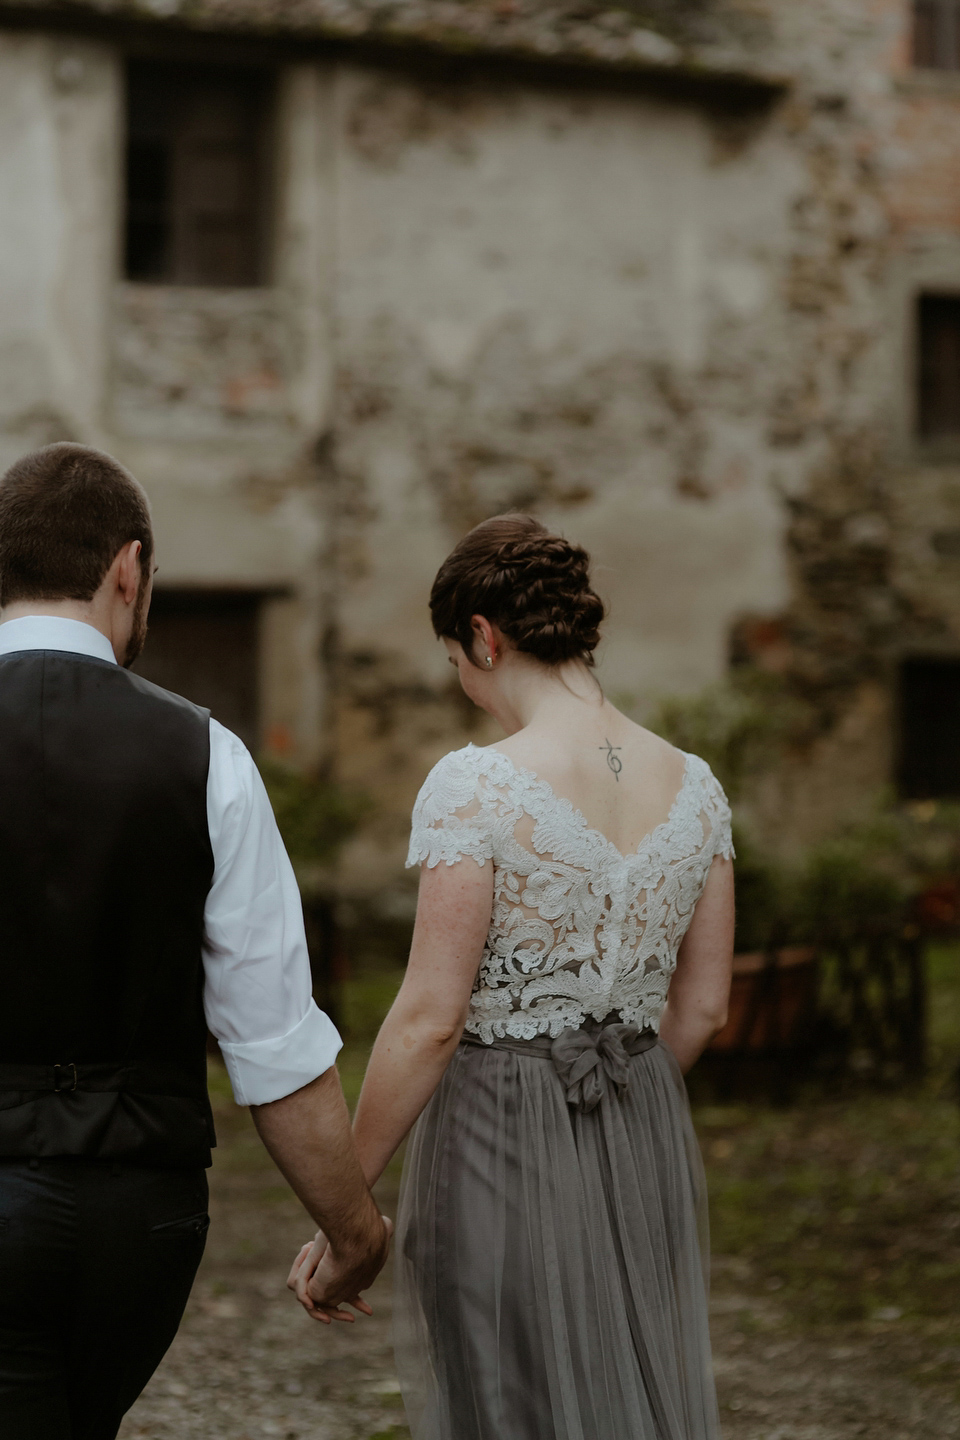 The bride wears a Jenny Yoo gown in soft grey tulle for her rustic Italian villa wedding. Photography by Cinzia Bruschini.